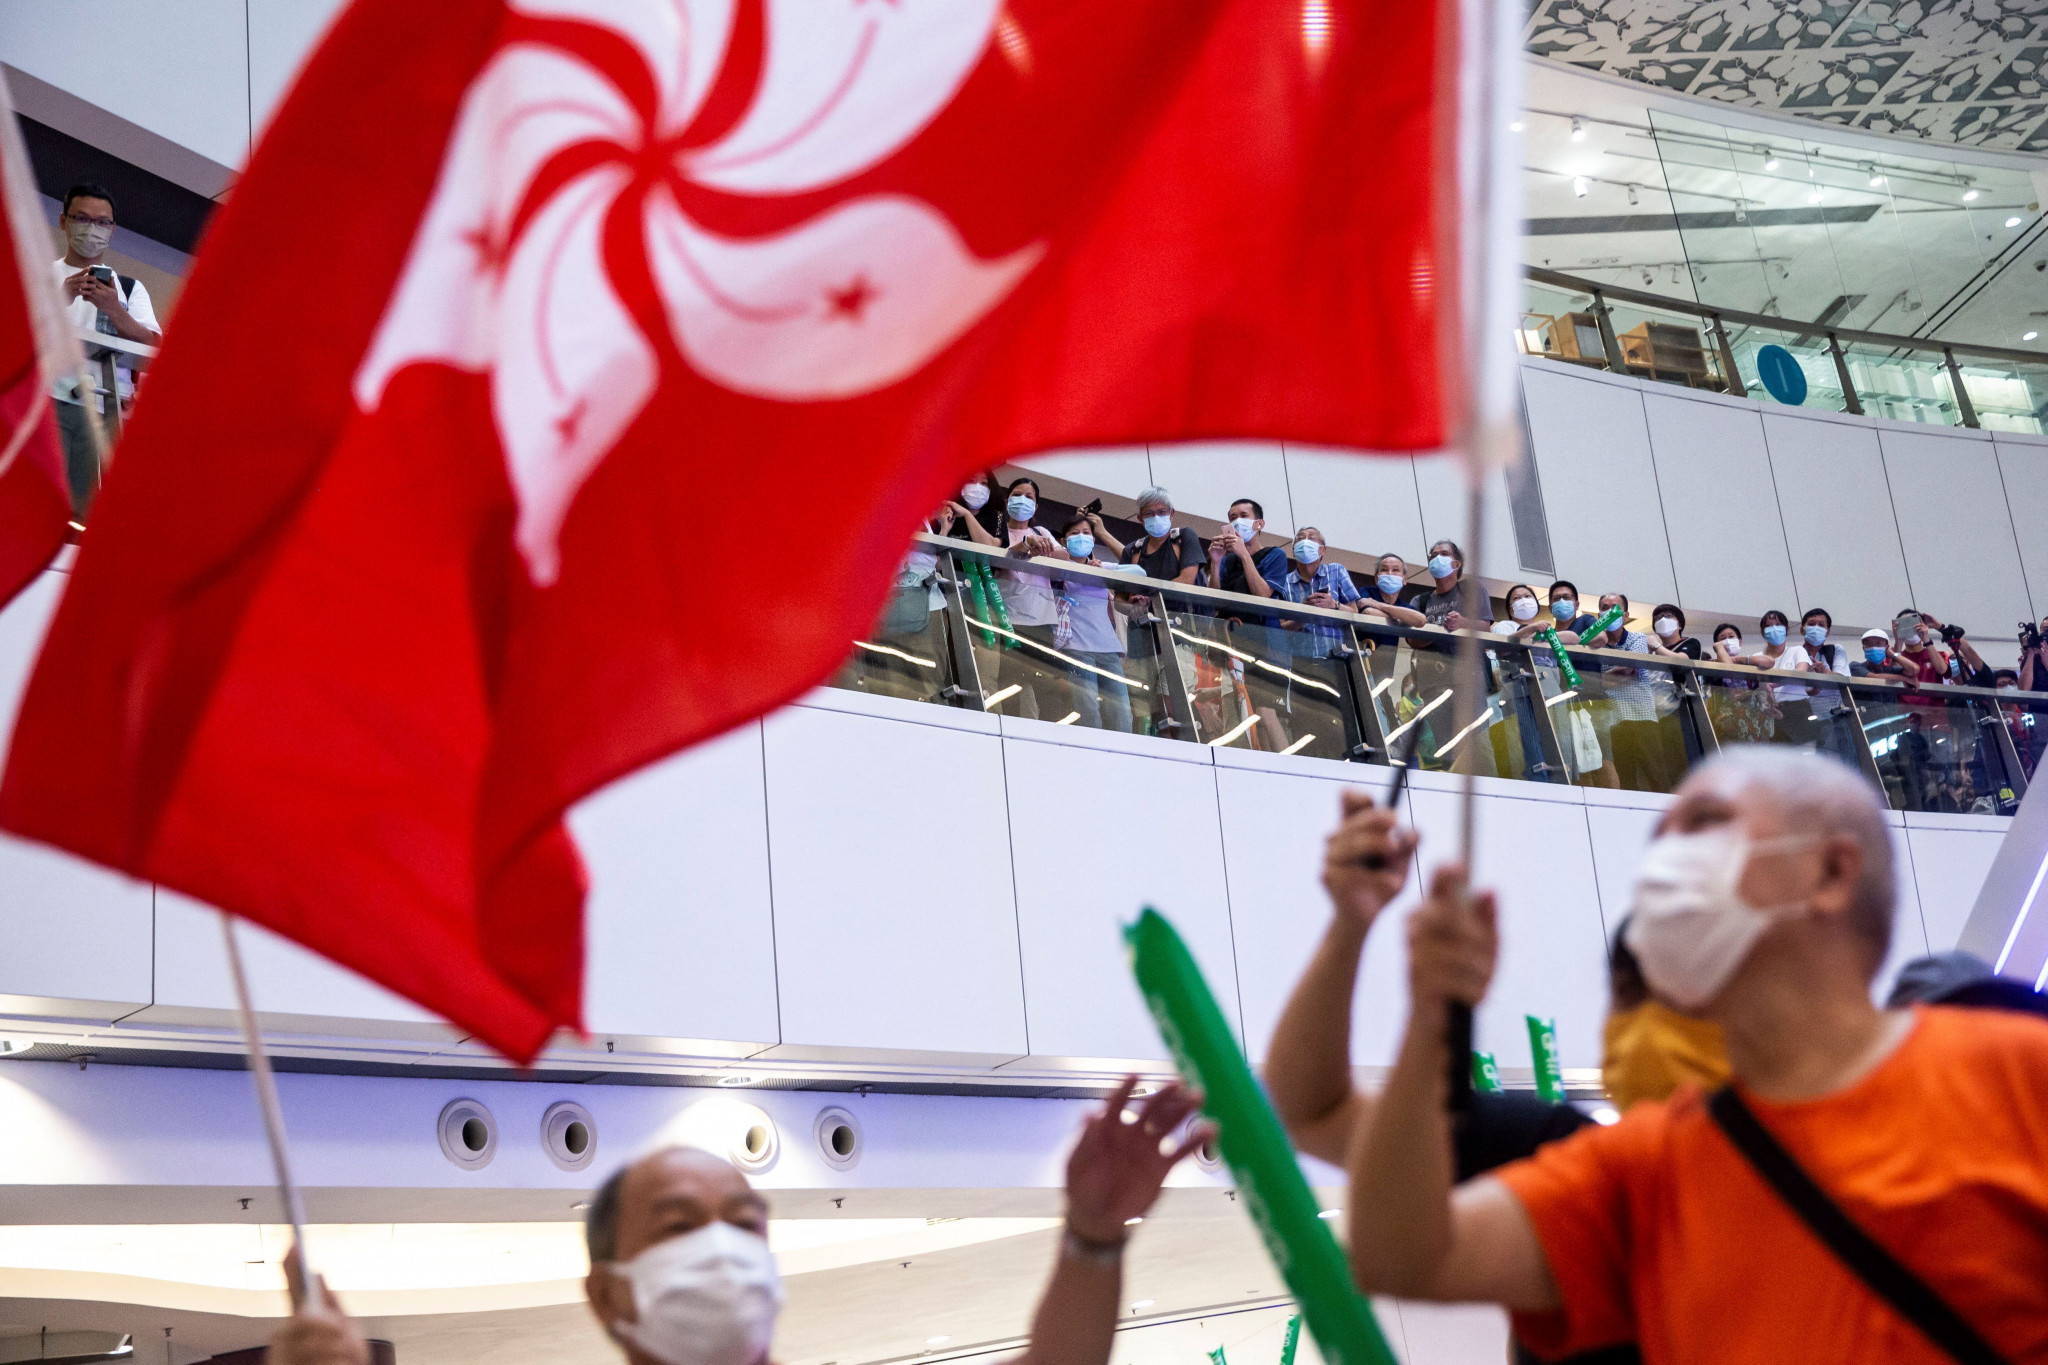 Hong Kong uses its own flag and China's national anthem in international sport, but it has proved controversial at several events recently ©Getty Images